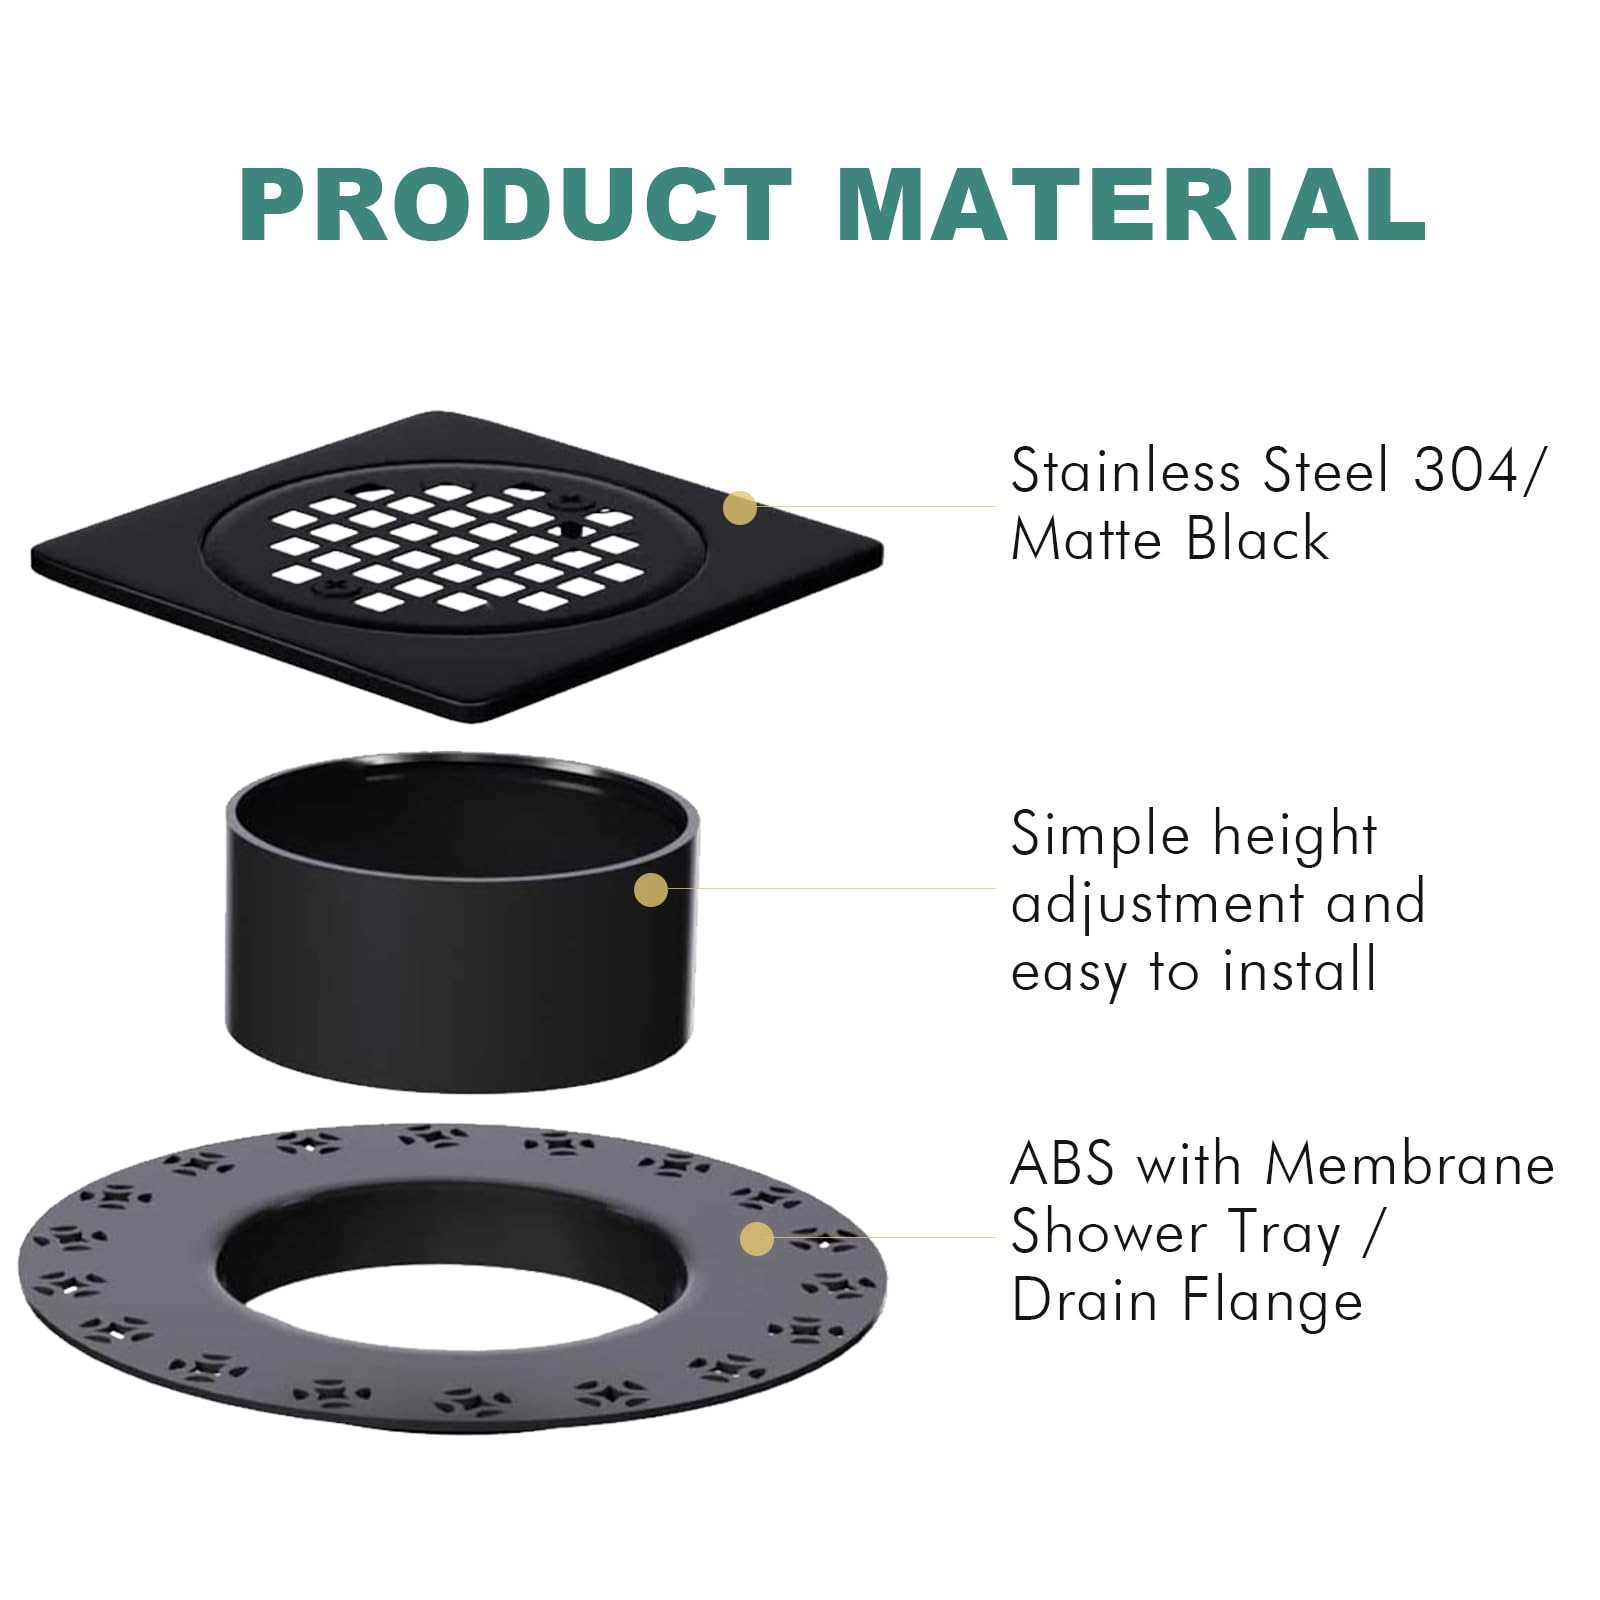 Uni-Green 4” Drain Grate Kit Replacement Compatible with Schluter Kerdi-Drain Flange - CUPC Certification, SS304 Stainless Steel and Durable ABS Material, Includes Height Adjustment Collar and Ring.